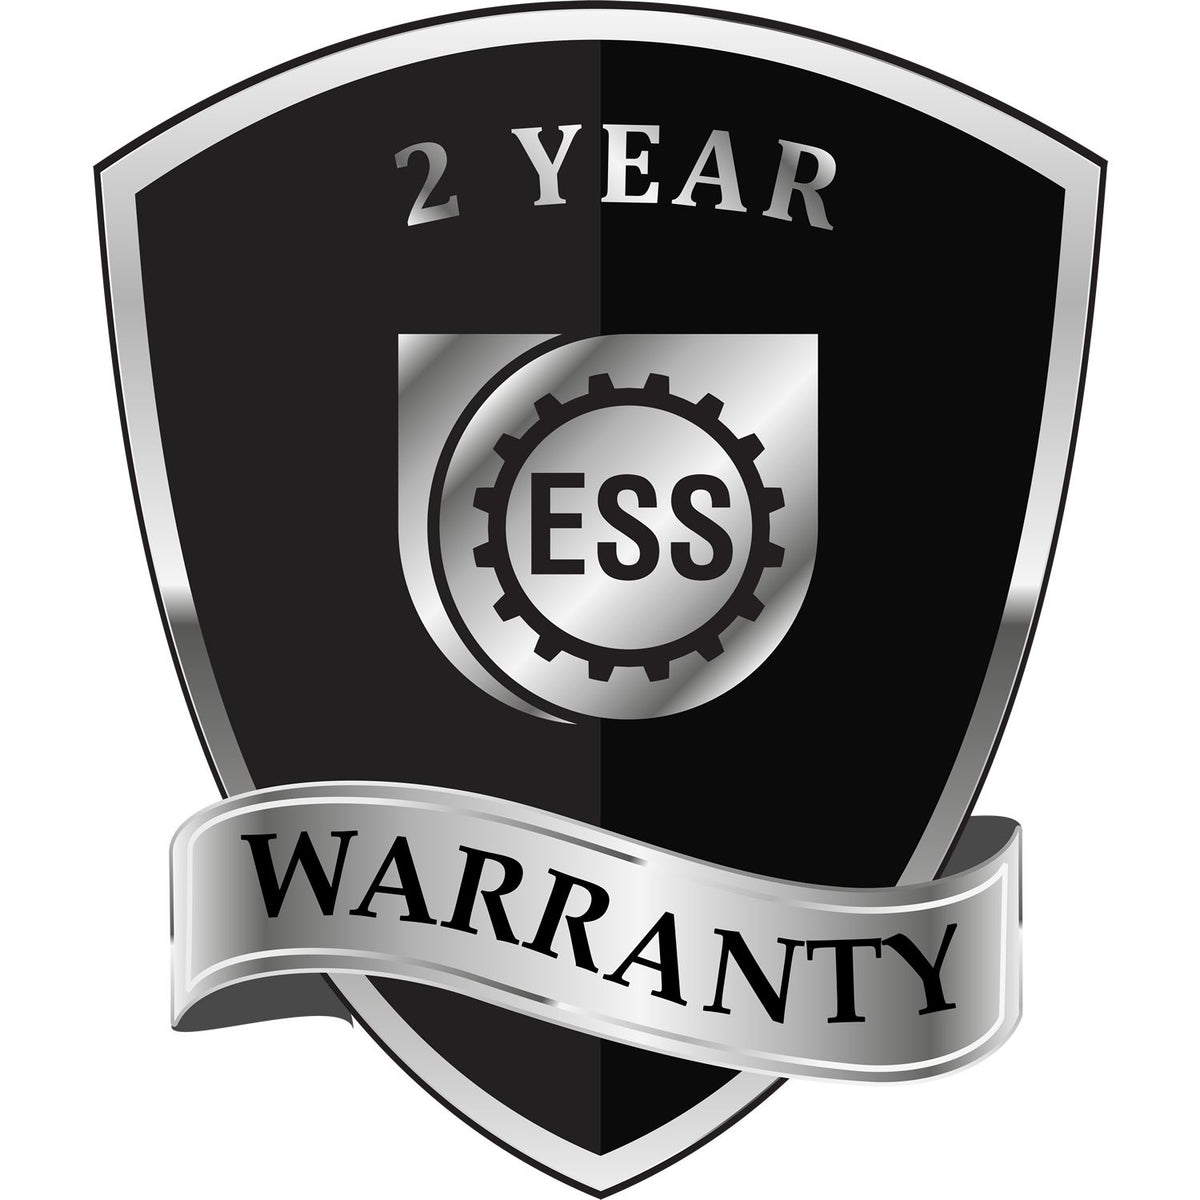 A badge or emblem showing a warranty icon for the Heavy Duty Cast Iron Utah Engineer Seal Embosser